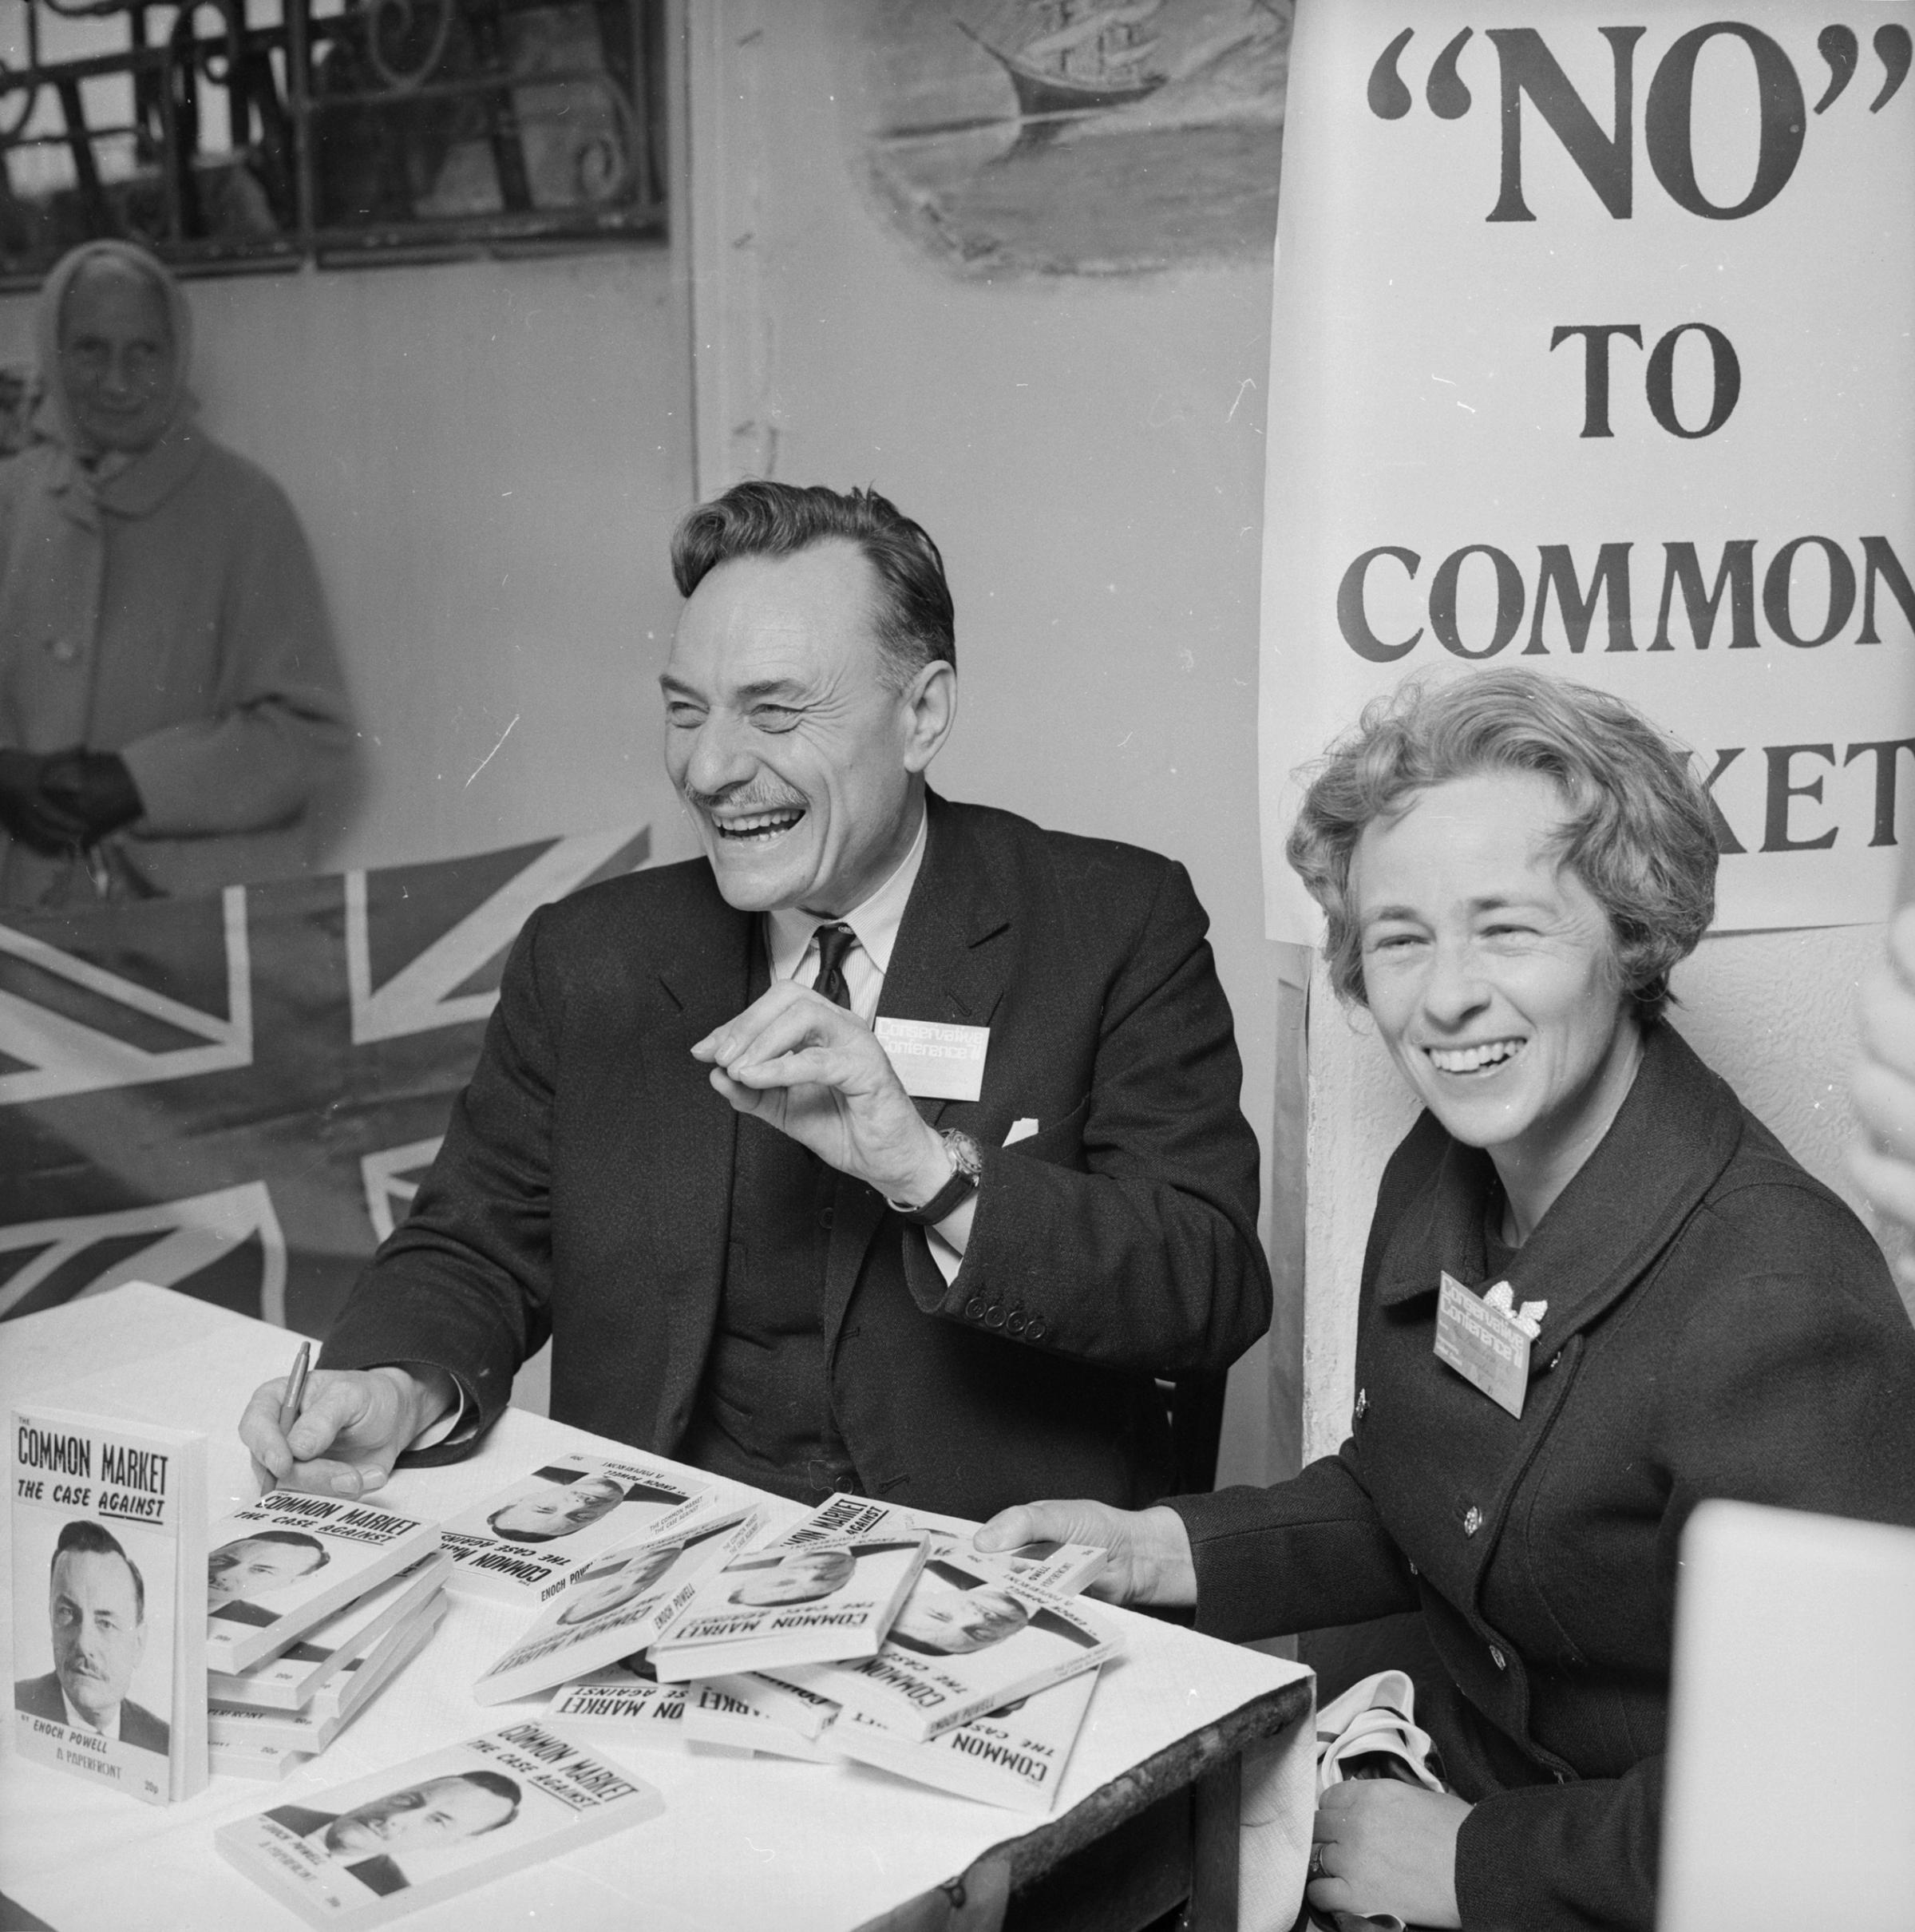 English Conservative politician, (John) Enoch Powell with his wife as he signs copies of his book 'Common Market - The Case Against' during the Conservative Party Conference in Brighton, Oct. 13, 1971